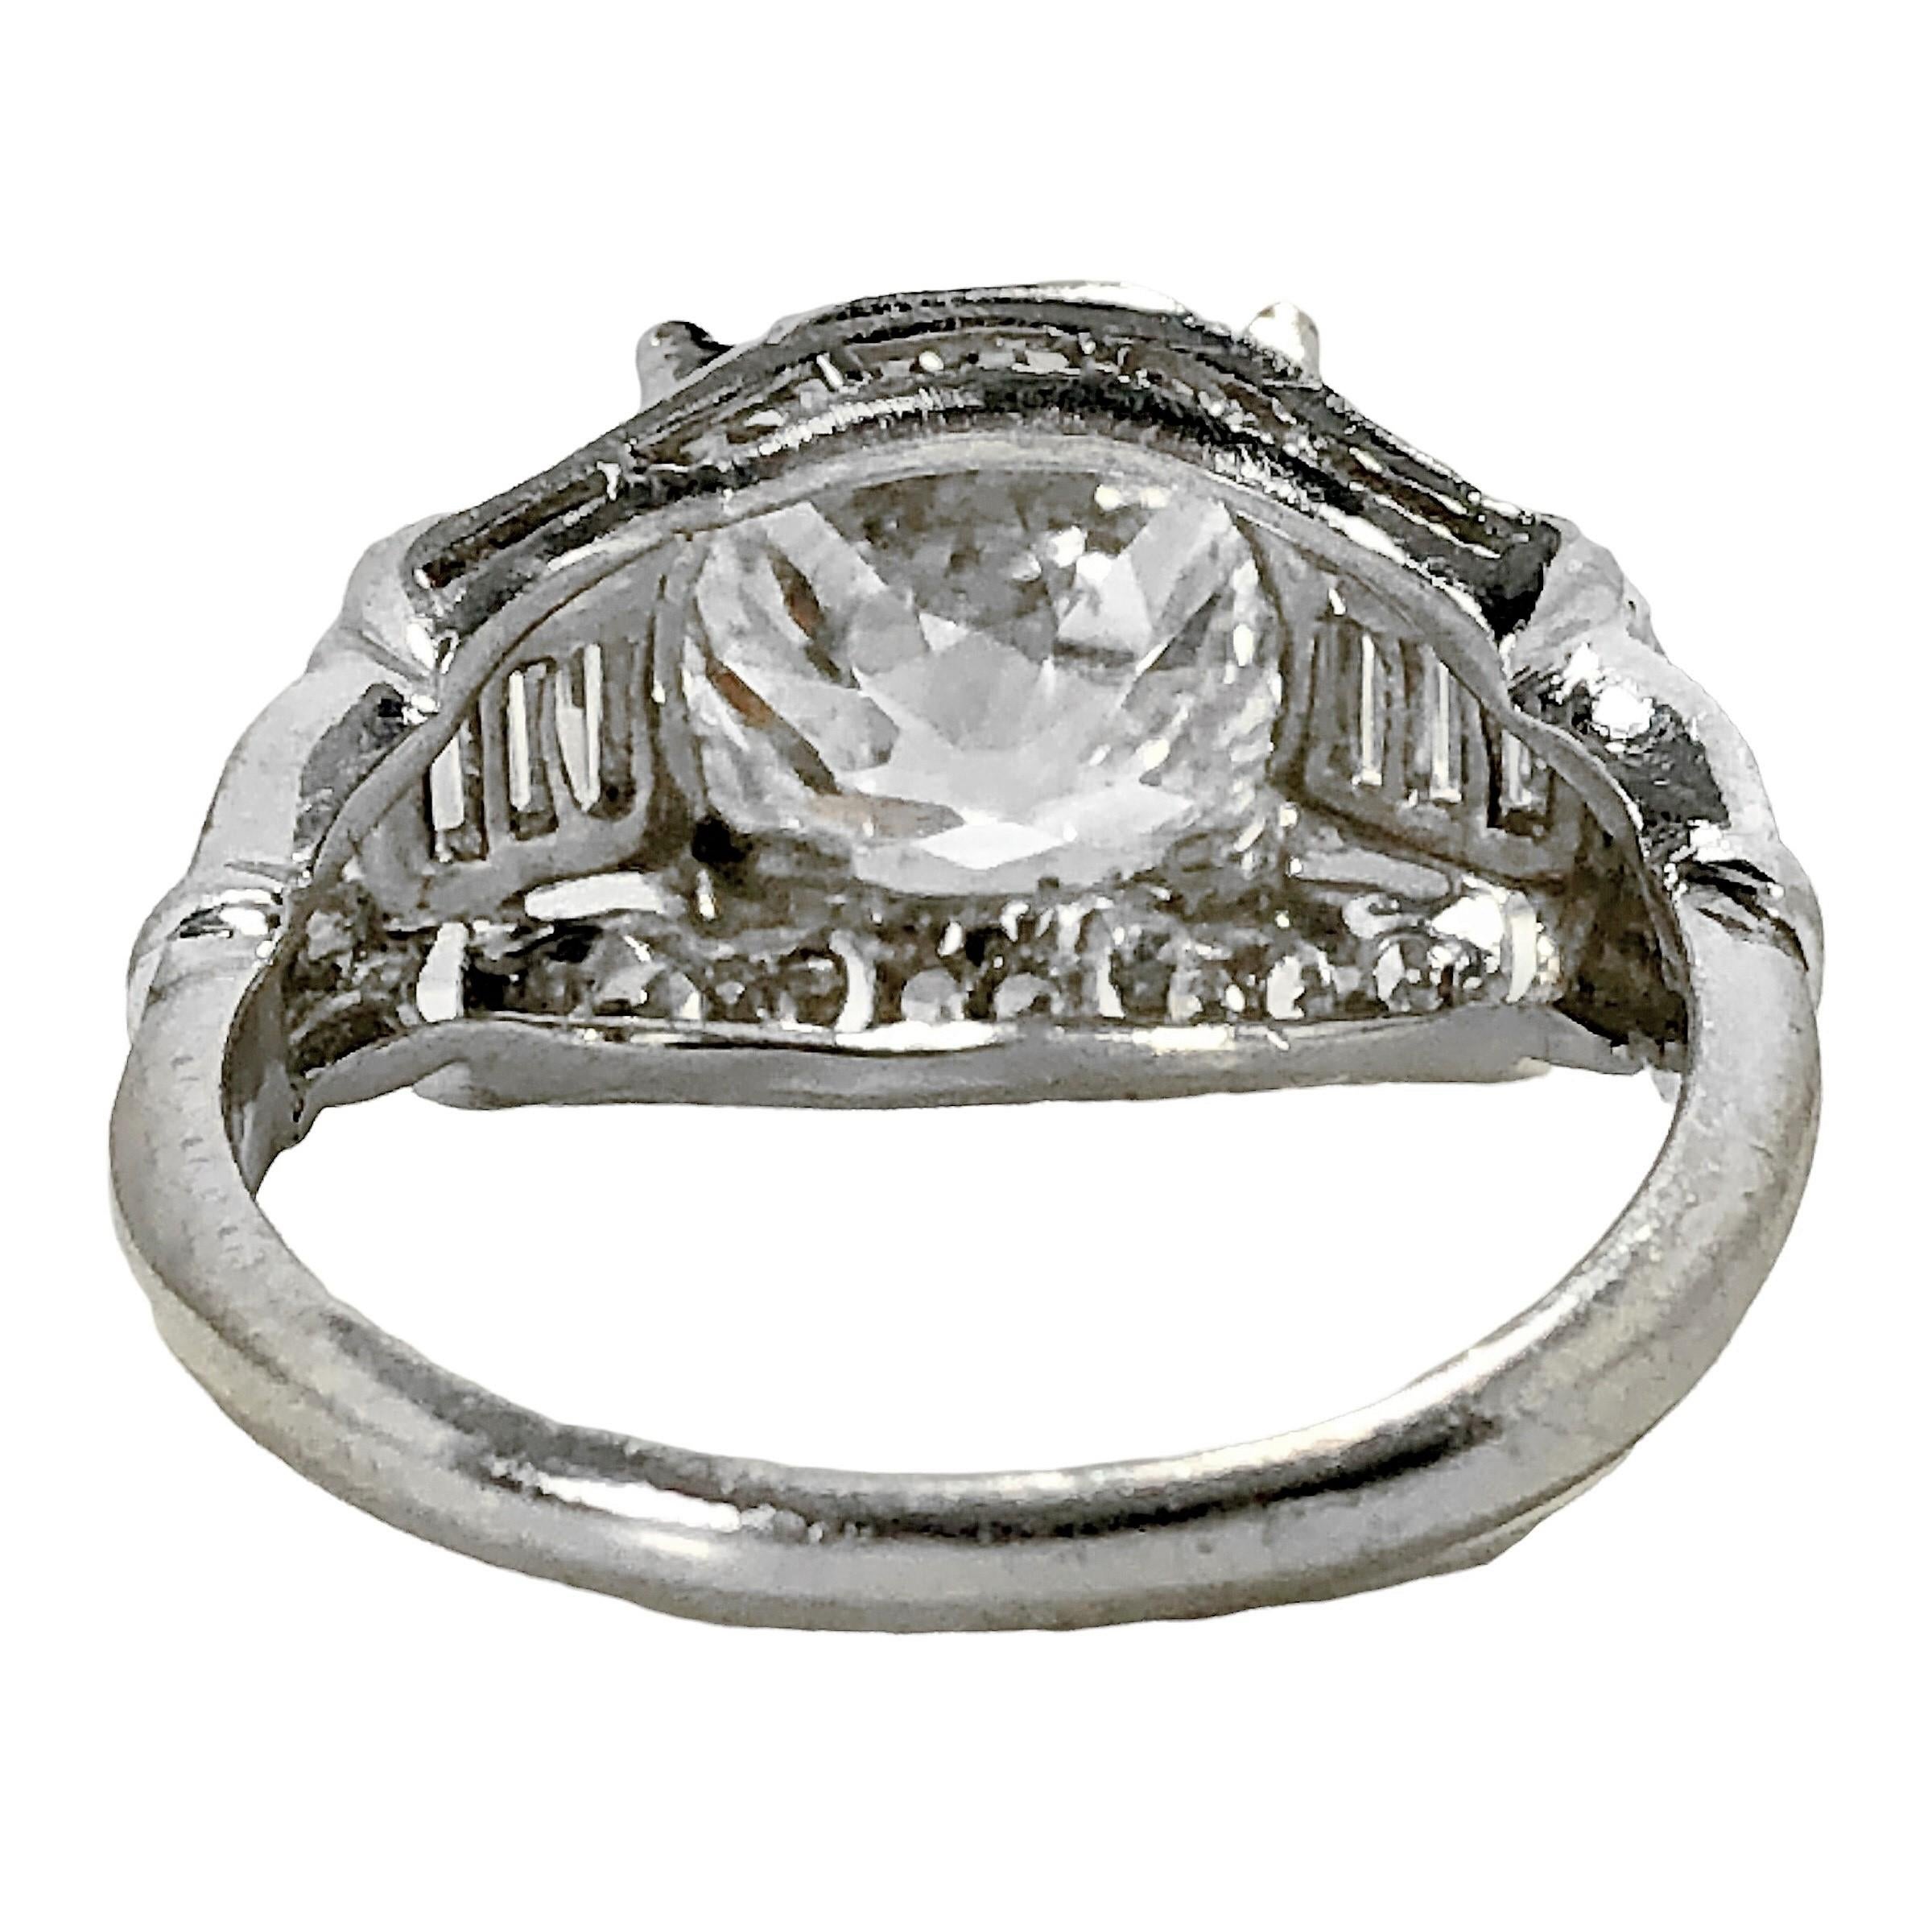 Women's Opulent 2.98ct Old Cushion Cut Diamond in Platinum Art-Deco Solitaire Mounting